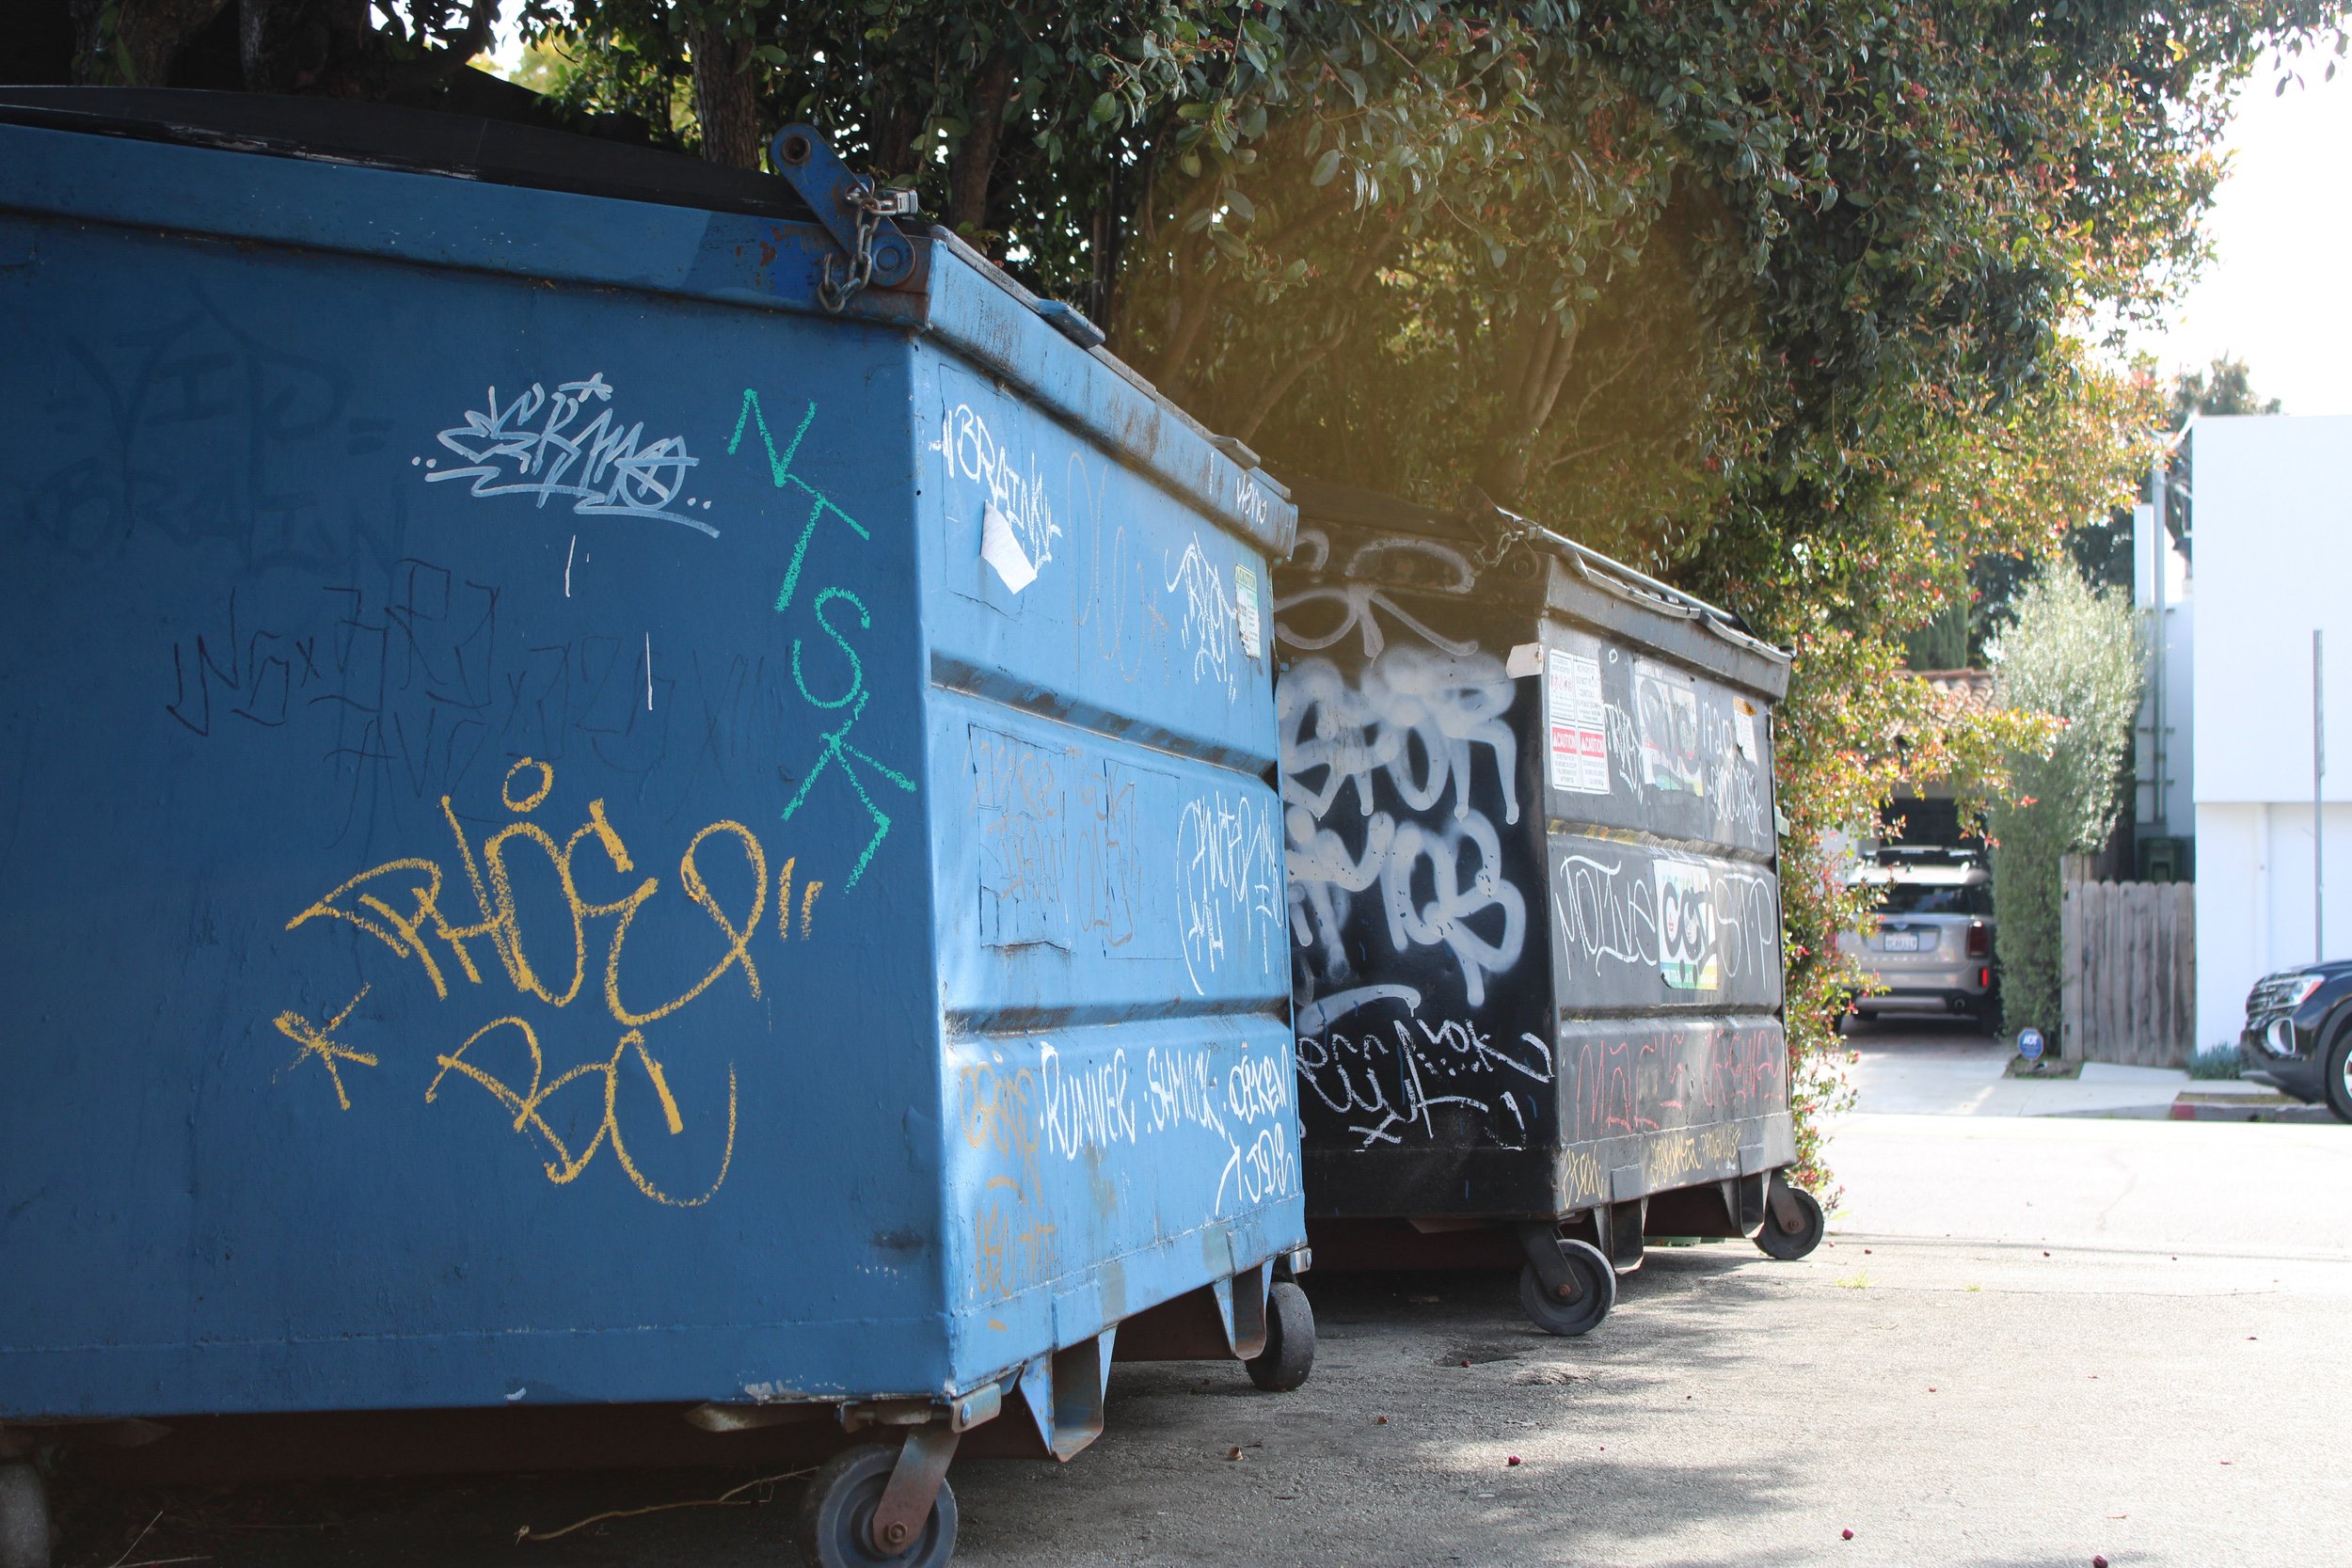  Dumpsters in the back of The Great Western Steak and Hoogie Co. covered in graffiti tags in a Venice, Calif. parking lot on Monday, March 11. (Makaela Fujimoto | The Corsair) 